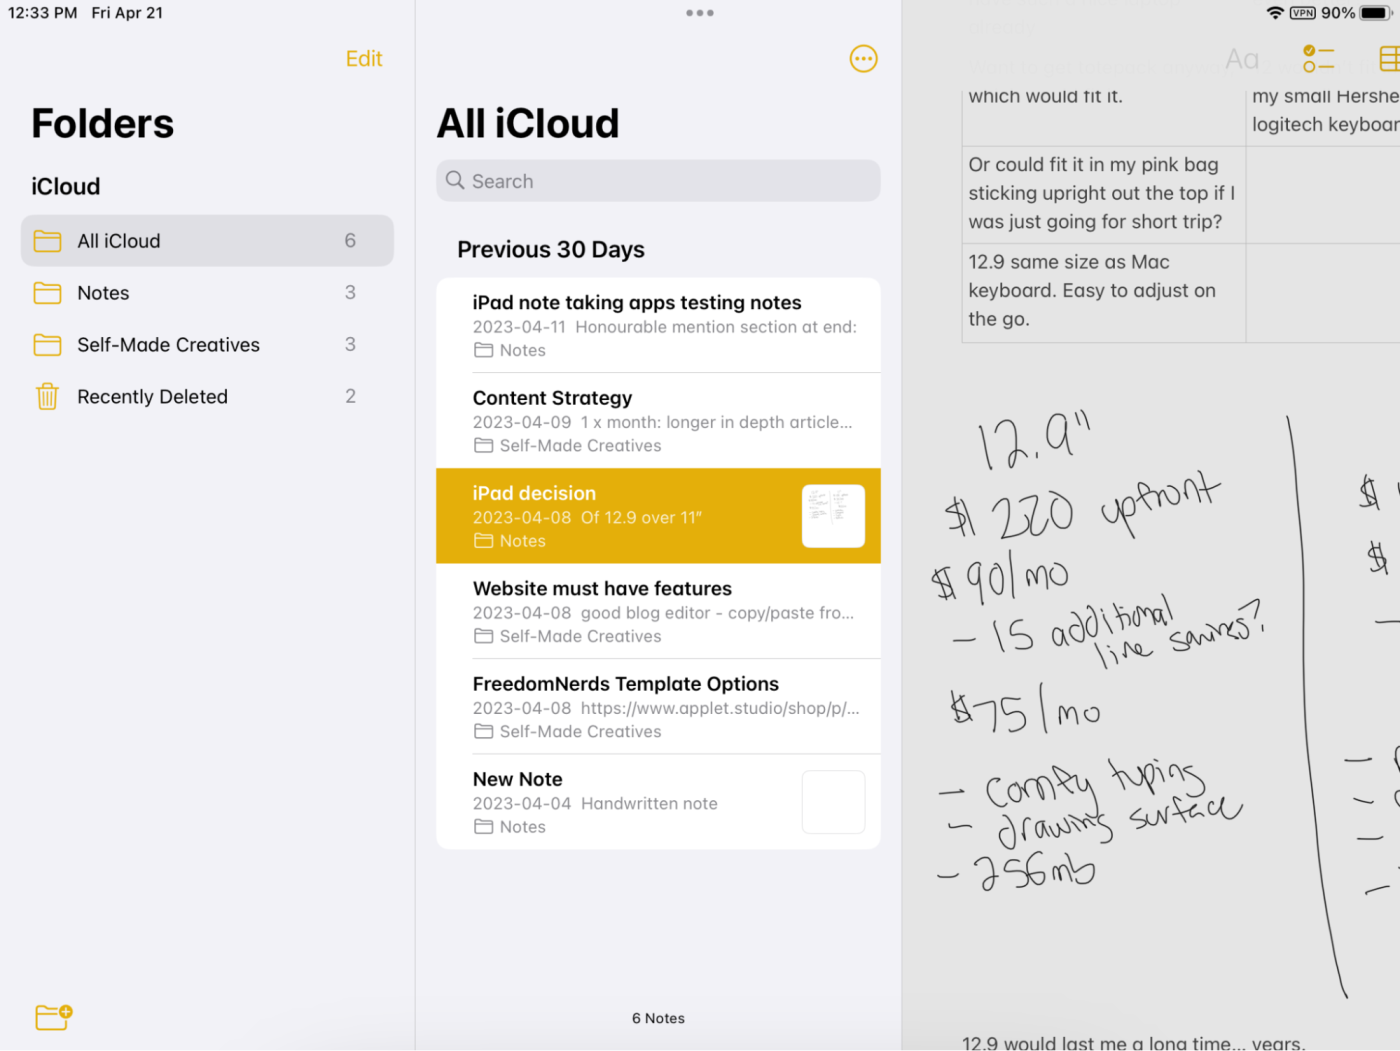 download notes on ipad from mac free tool